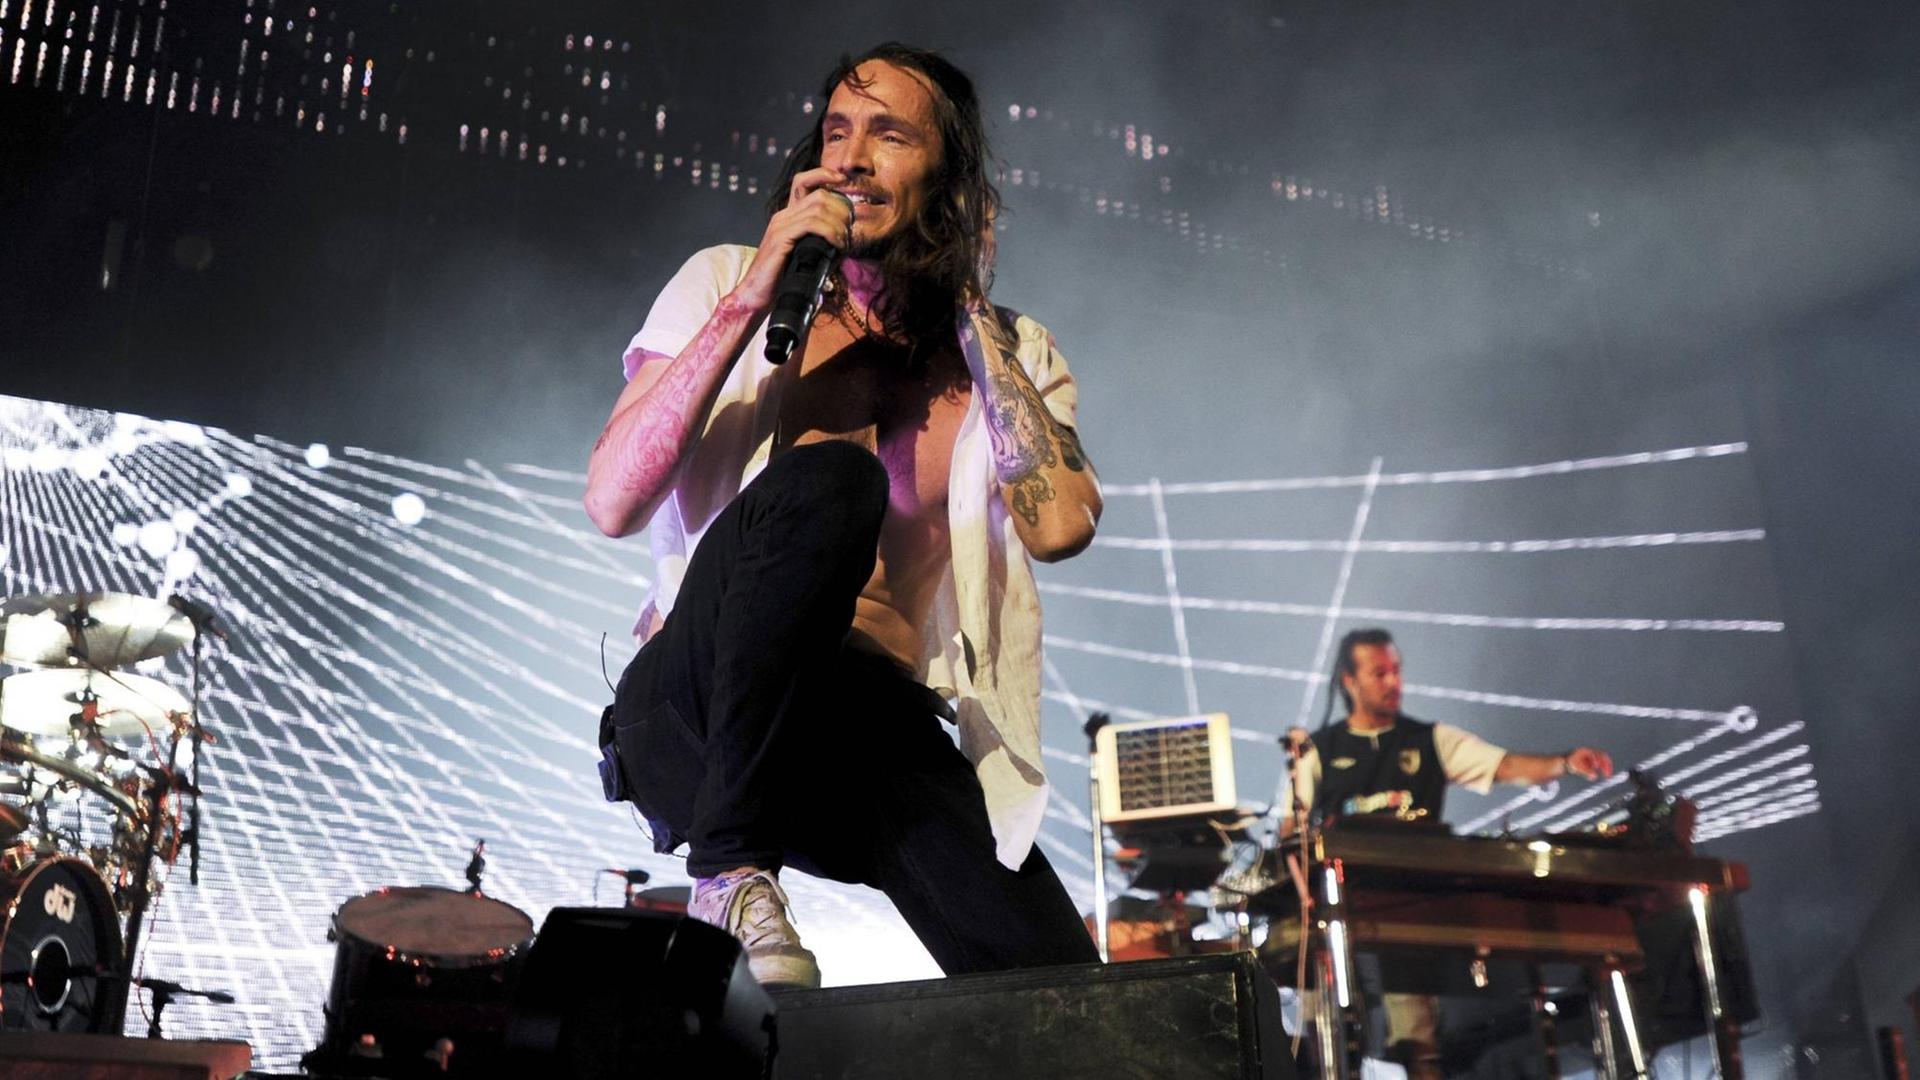 Die Band Incubus live im "Circuit of the Americas" Amphitheater in Austin am 17.08.2015.